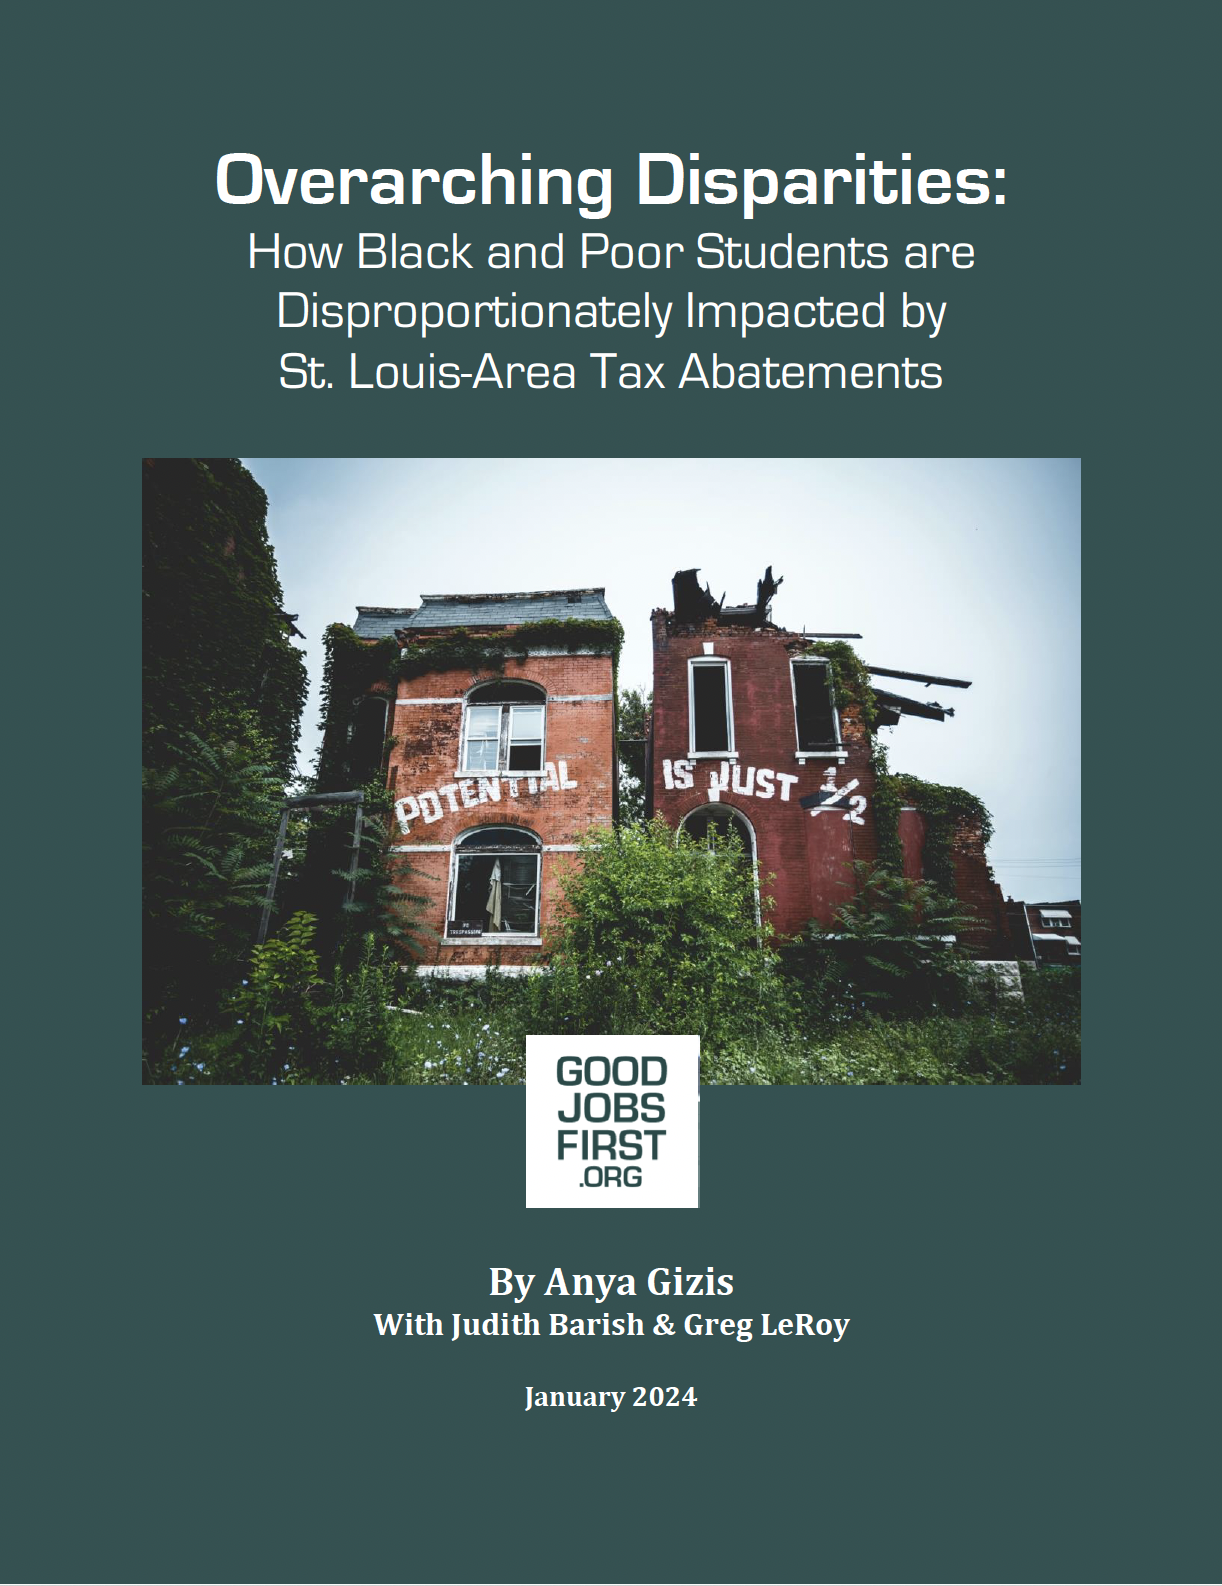 Overarching Disparities: How Black and Poor Students are Disproportionately Impacted  by St. Louis-Area Tax Abatements